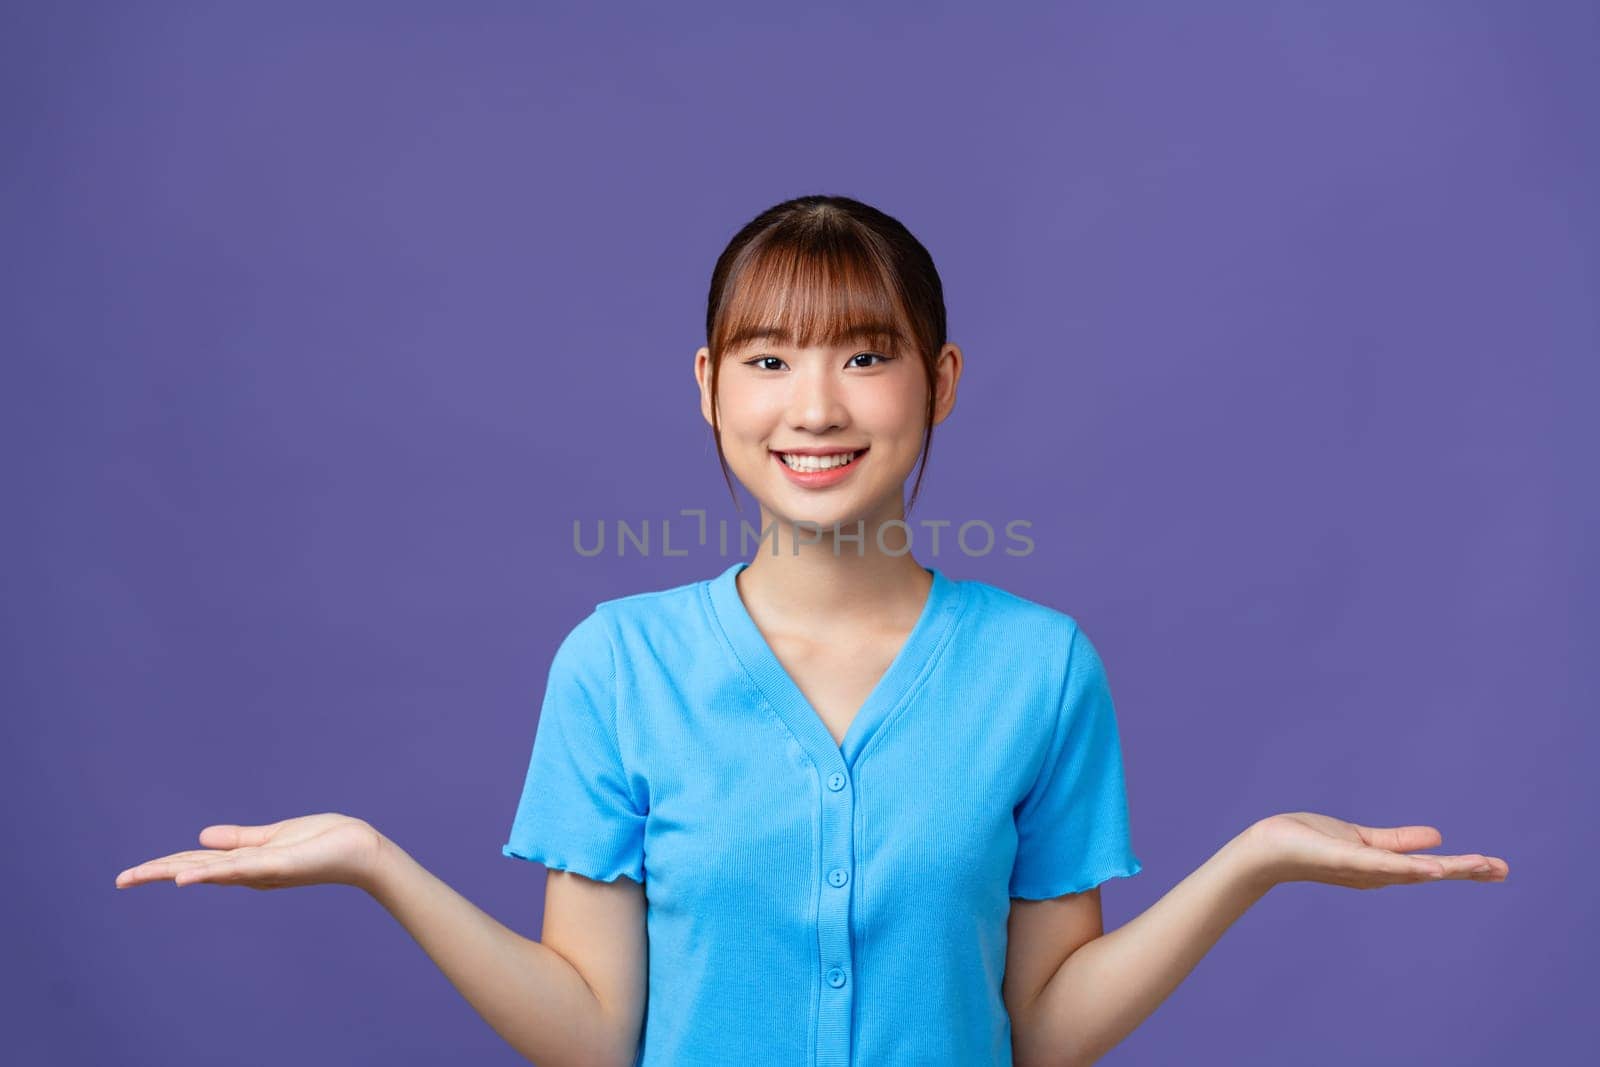 Young woman smiling showing both hands open palms, presenting and advertising comparison and balance by makidotvn